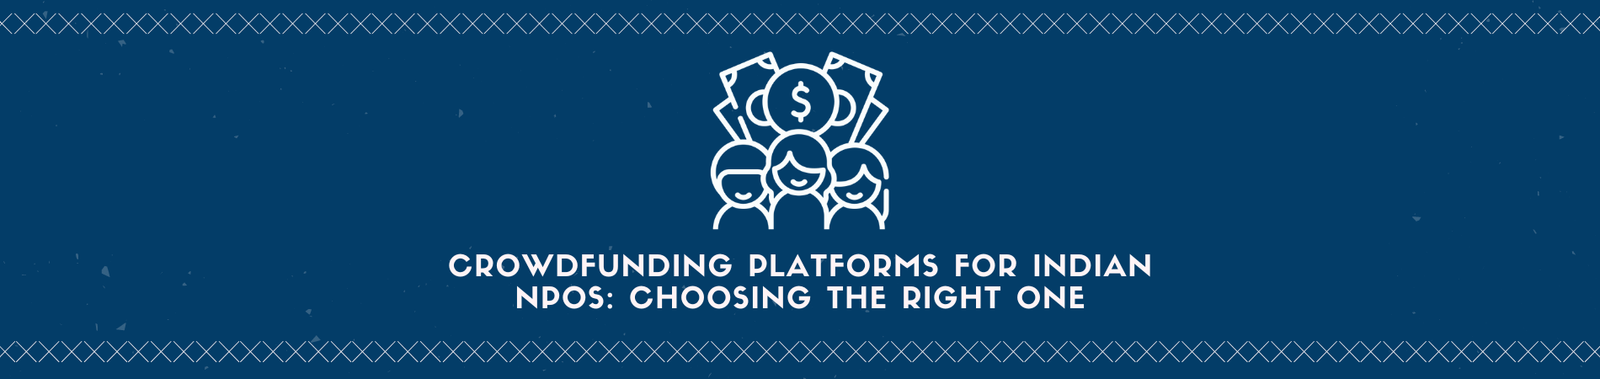 Crowdfunding Platforms for Indian NPOs: Choosing the Right One